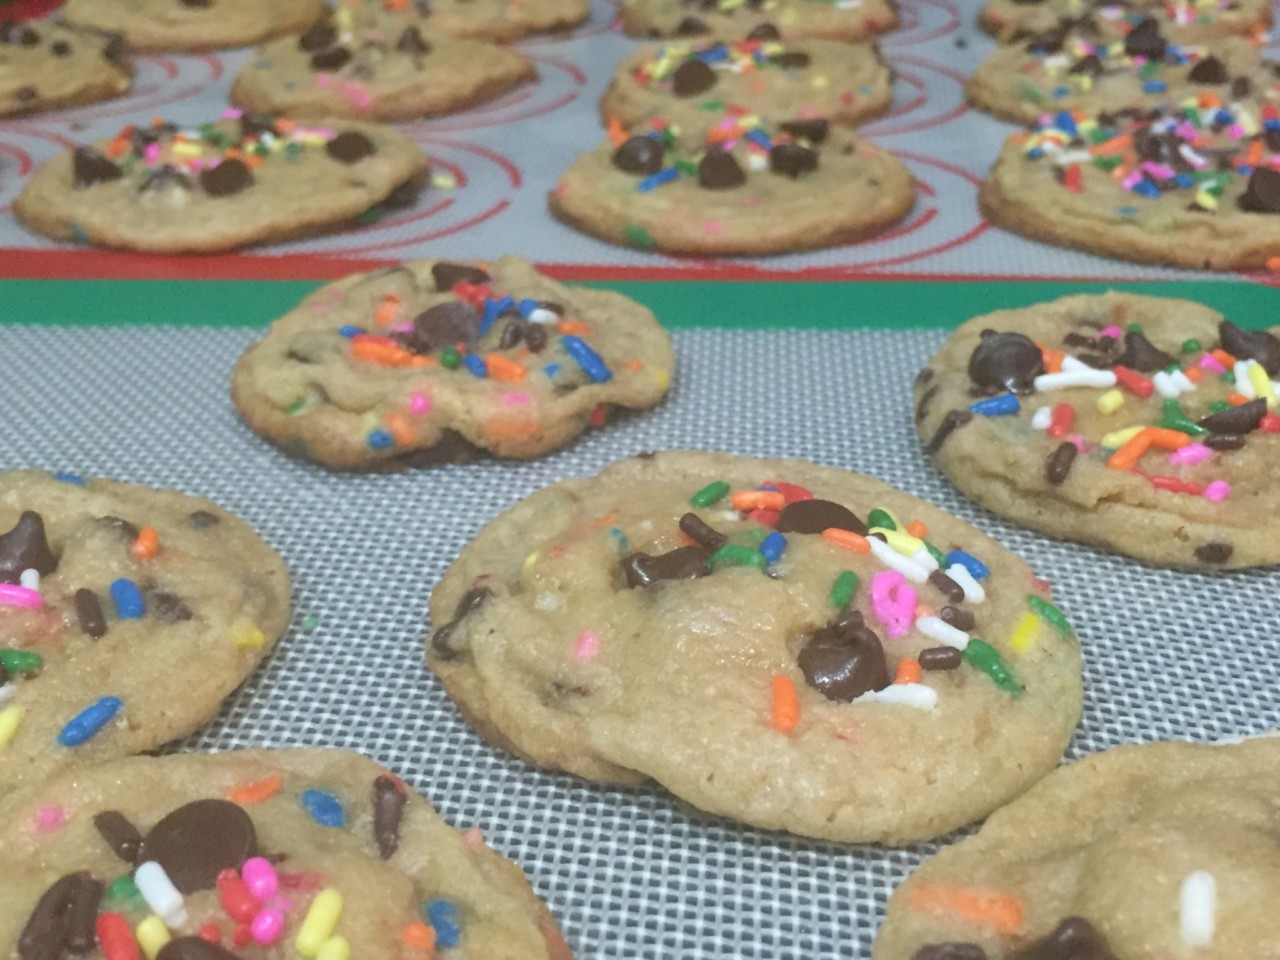 Cake Batter Chocolate Chip Cookies @ bestwithchocolate.com